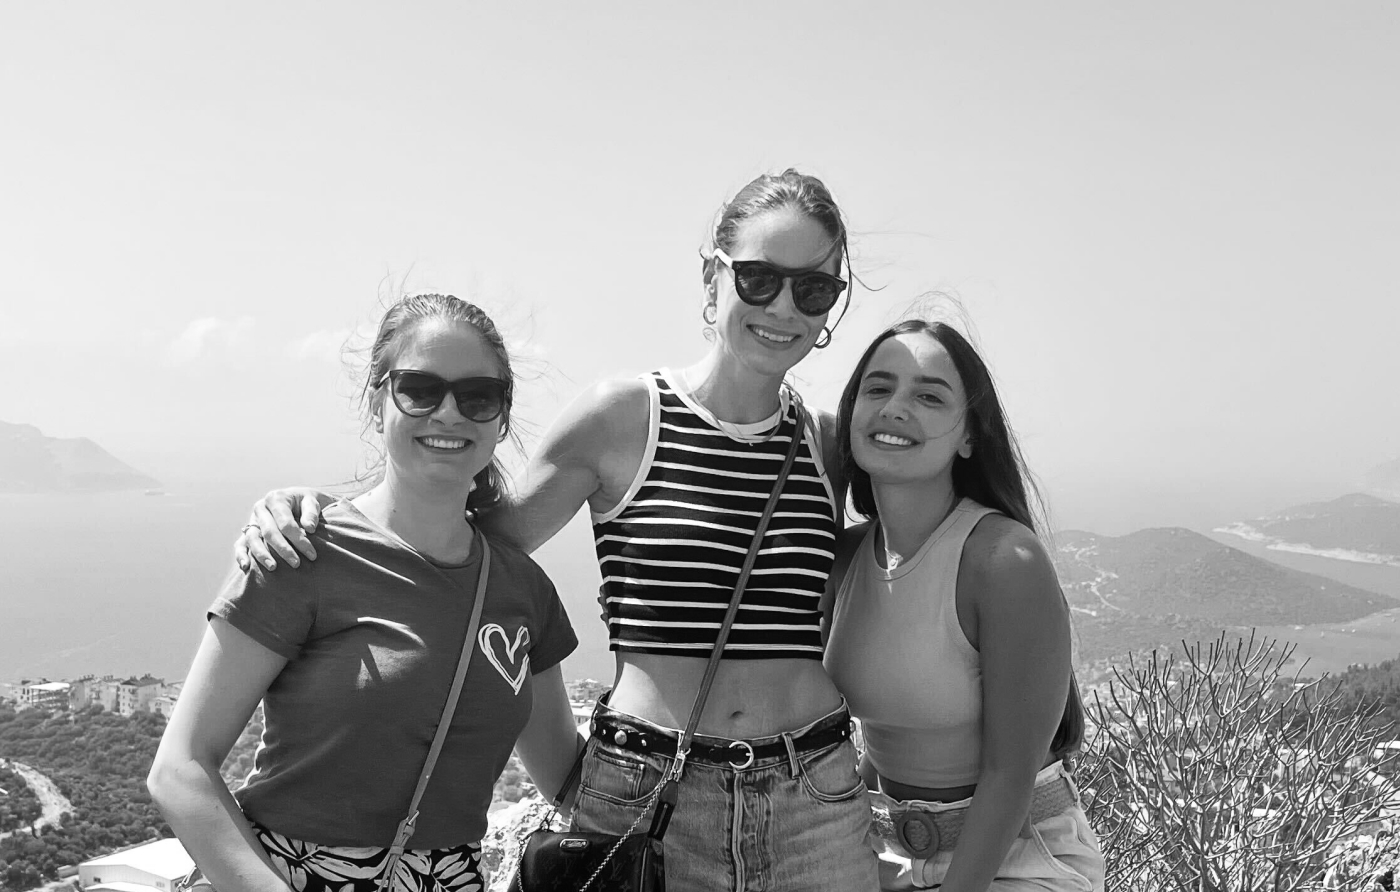 A black and white photograph of Chiara with two of her colleagues, Lilas and Dora. Chiara is standing in the middle with her arms around the other two.